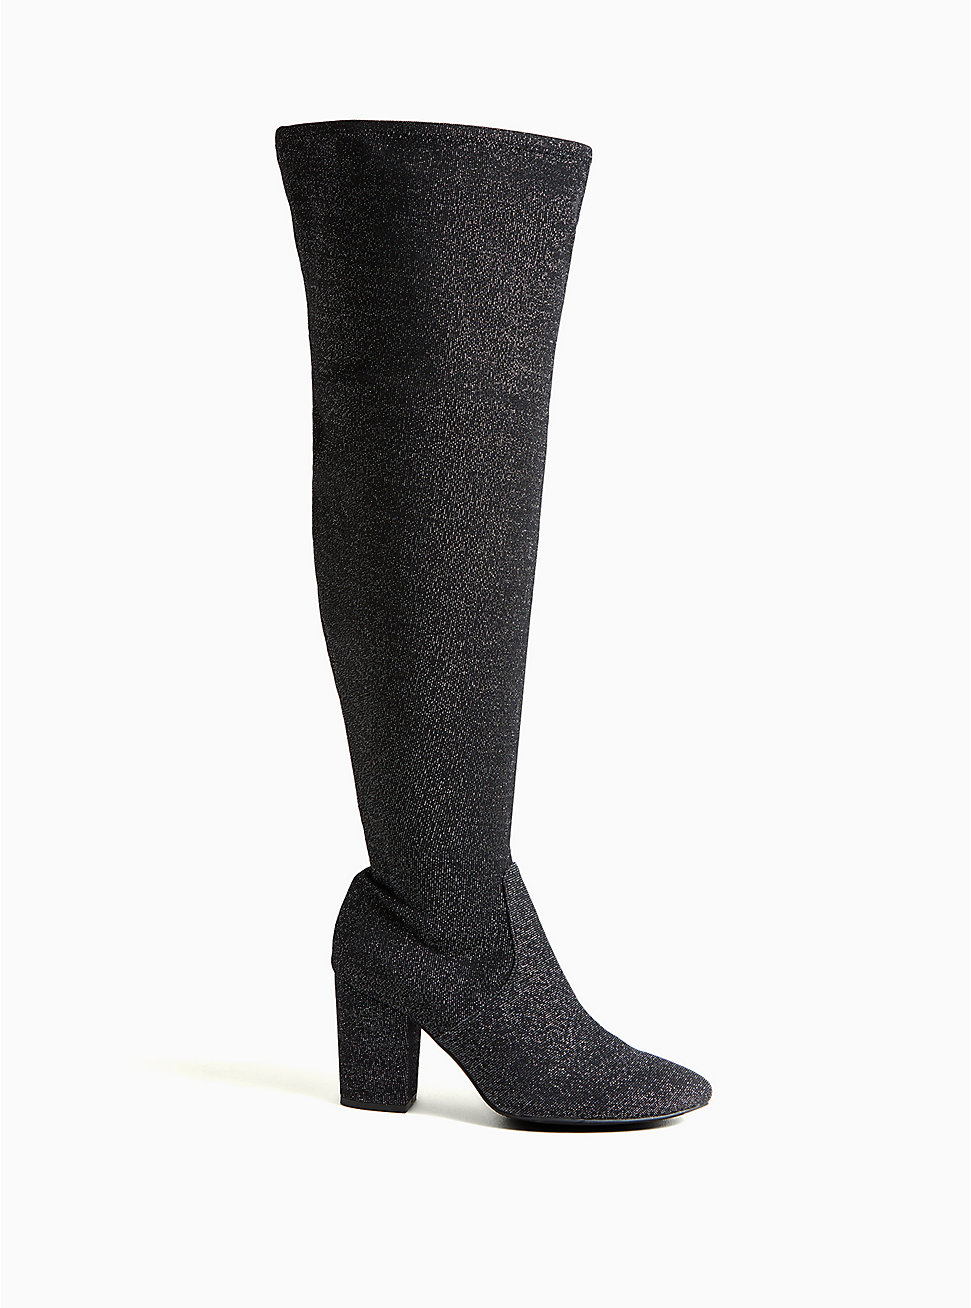 Torrid + Black Stretch Shimmer Pointed Toe Over The Knee Boot